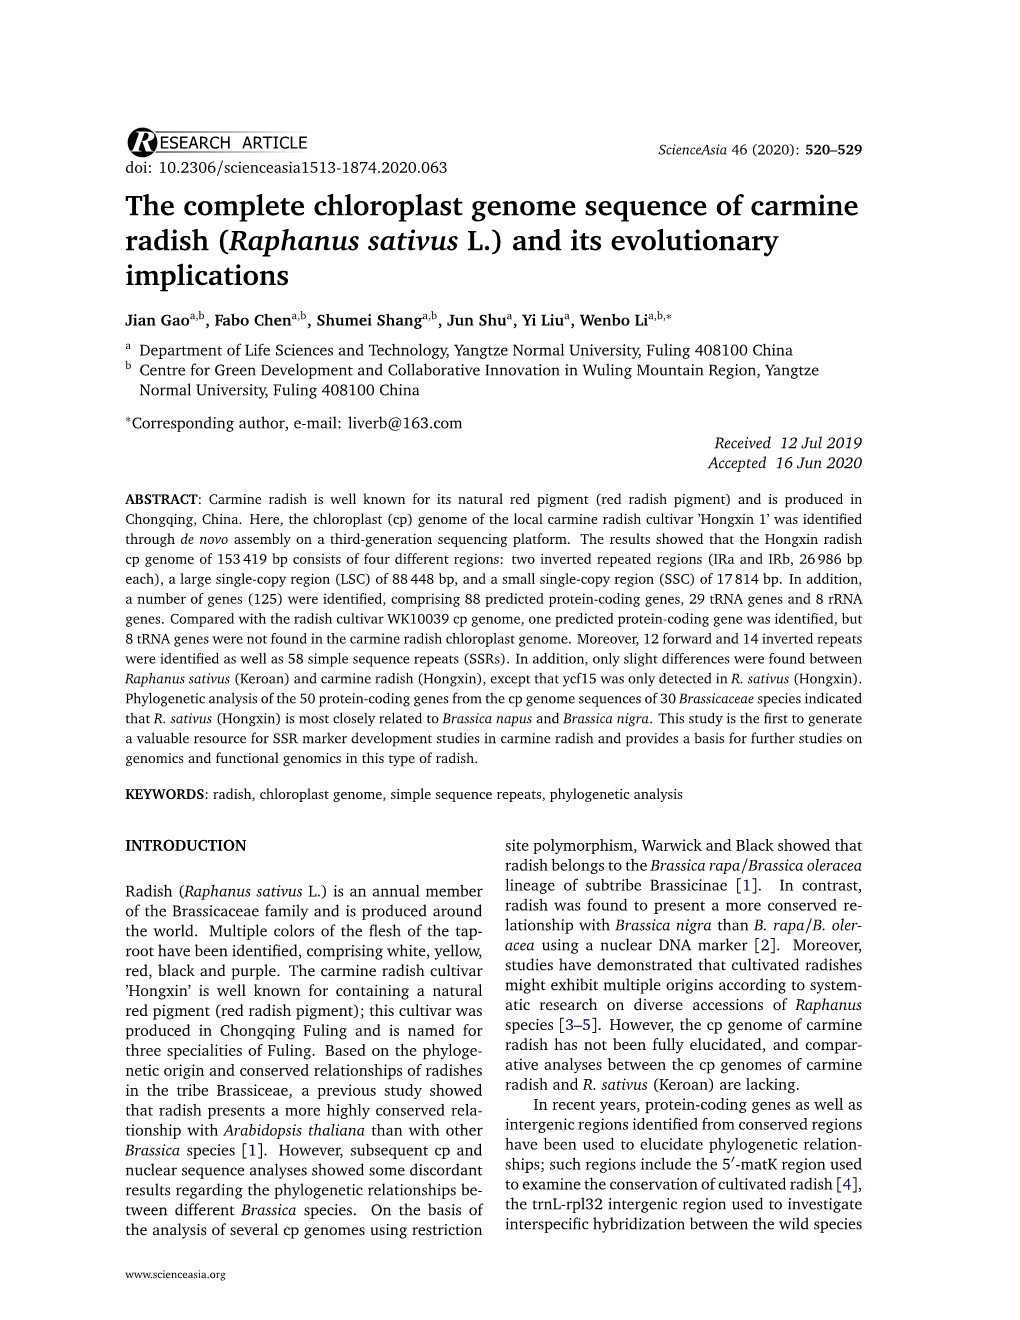 The Complete Chloroplast Genome Sequence of Carmine Radish (Raphanus Sativus L.) and Its Evolutionary Implications